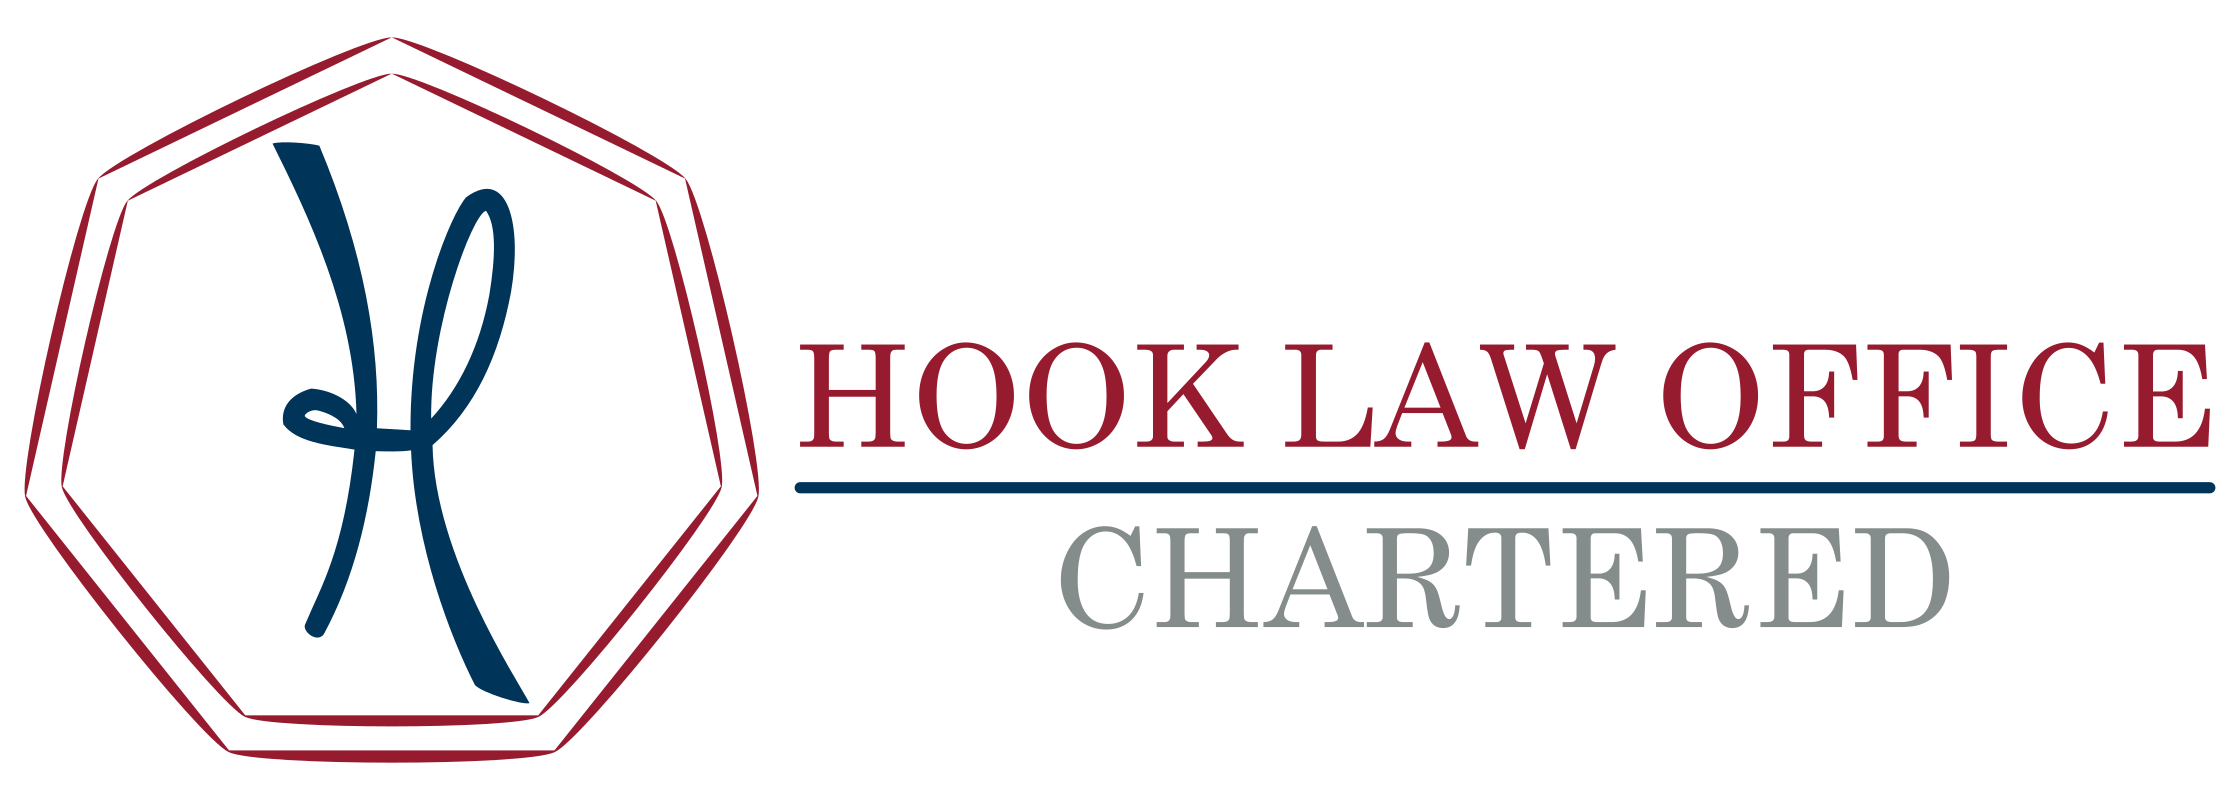 Hook Law Office Chartered